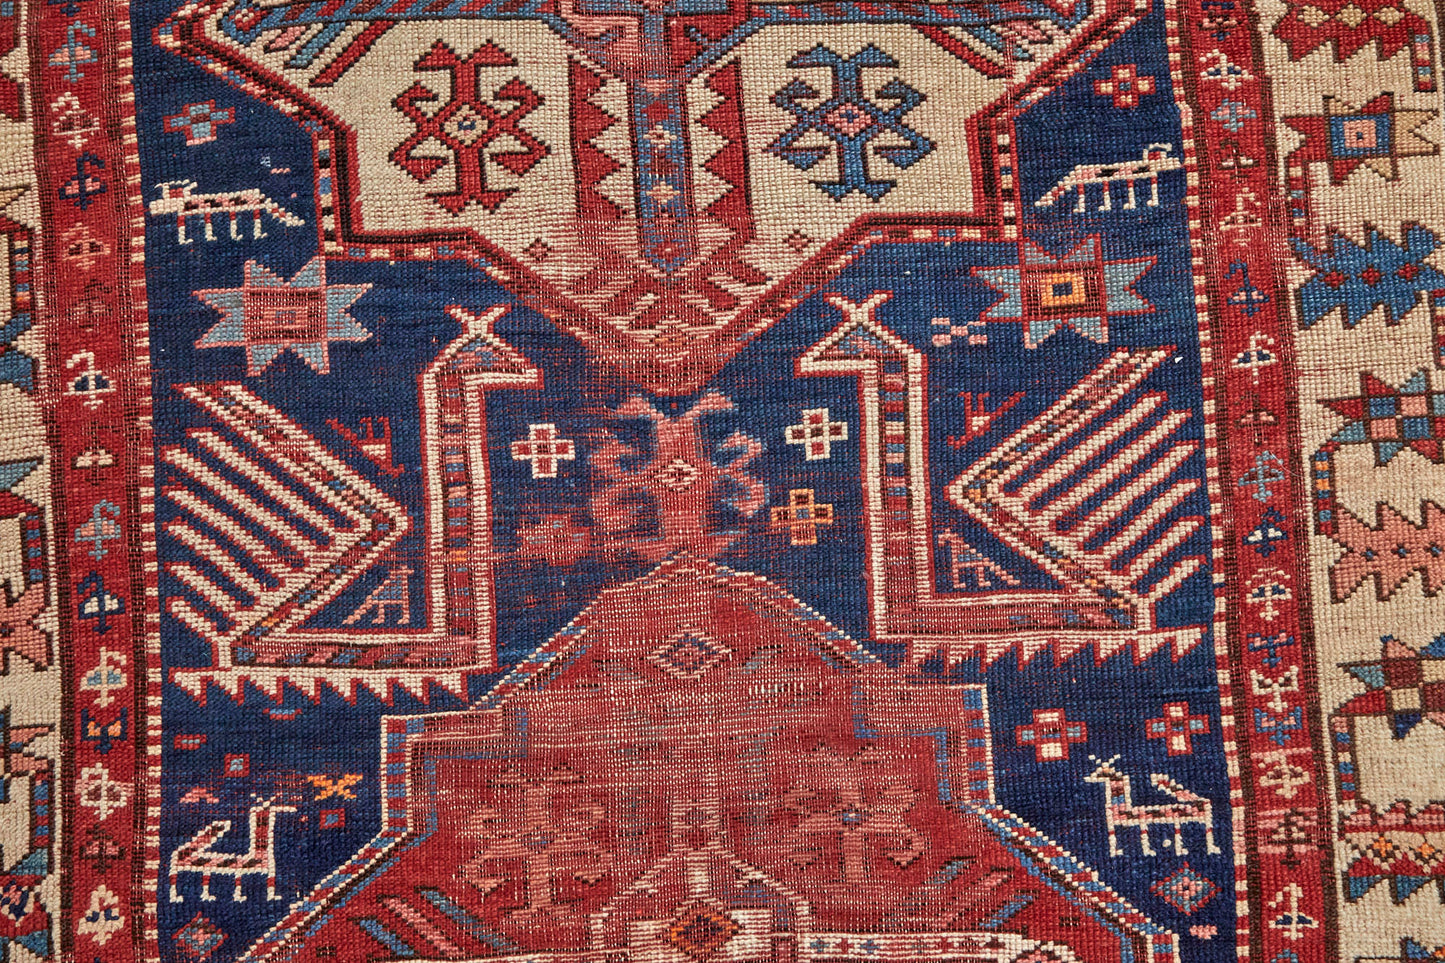 Antique hand woven Akstafa Persian Rug Runner - red, blue and cream with four medallions and bird shapes throughout - Available from King Kennedy Rugs Los Angeles 